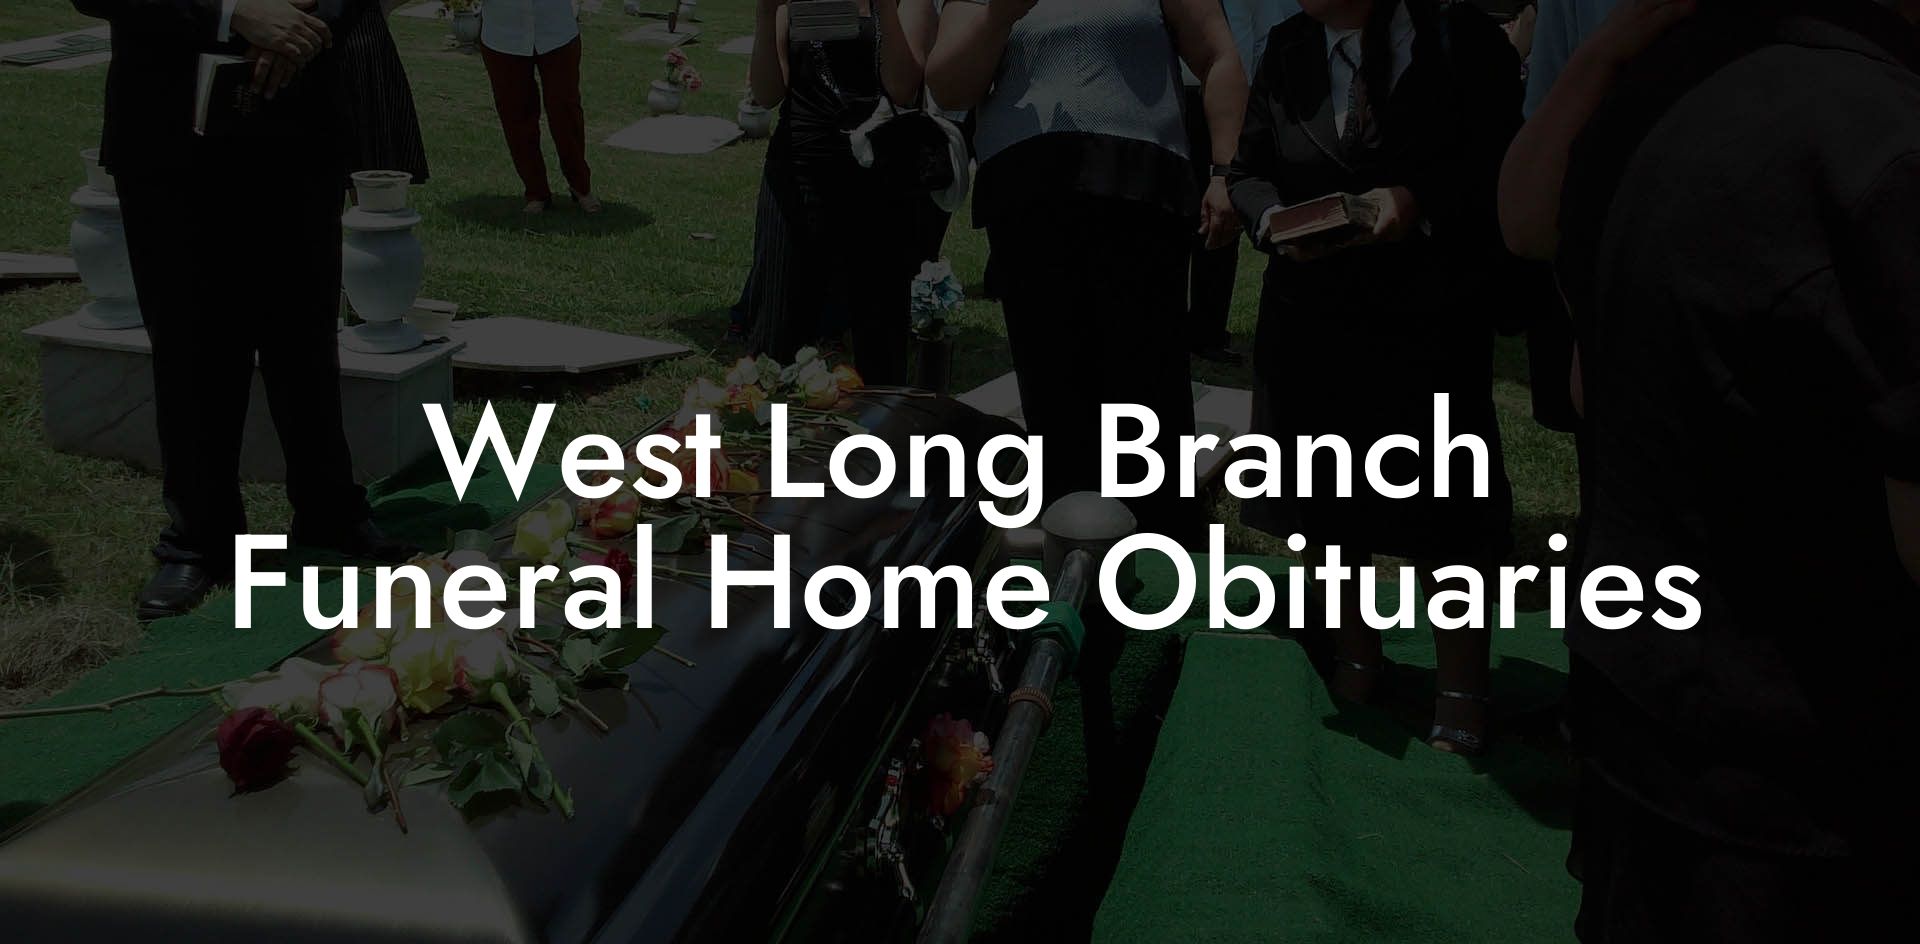 West Long Branch Funeral Home Obituaries